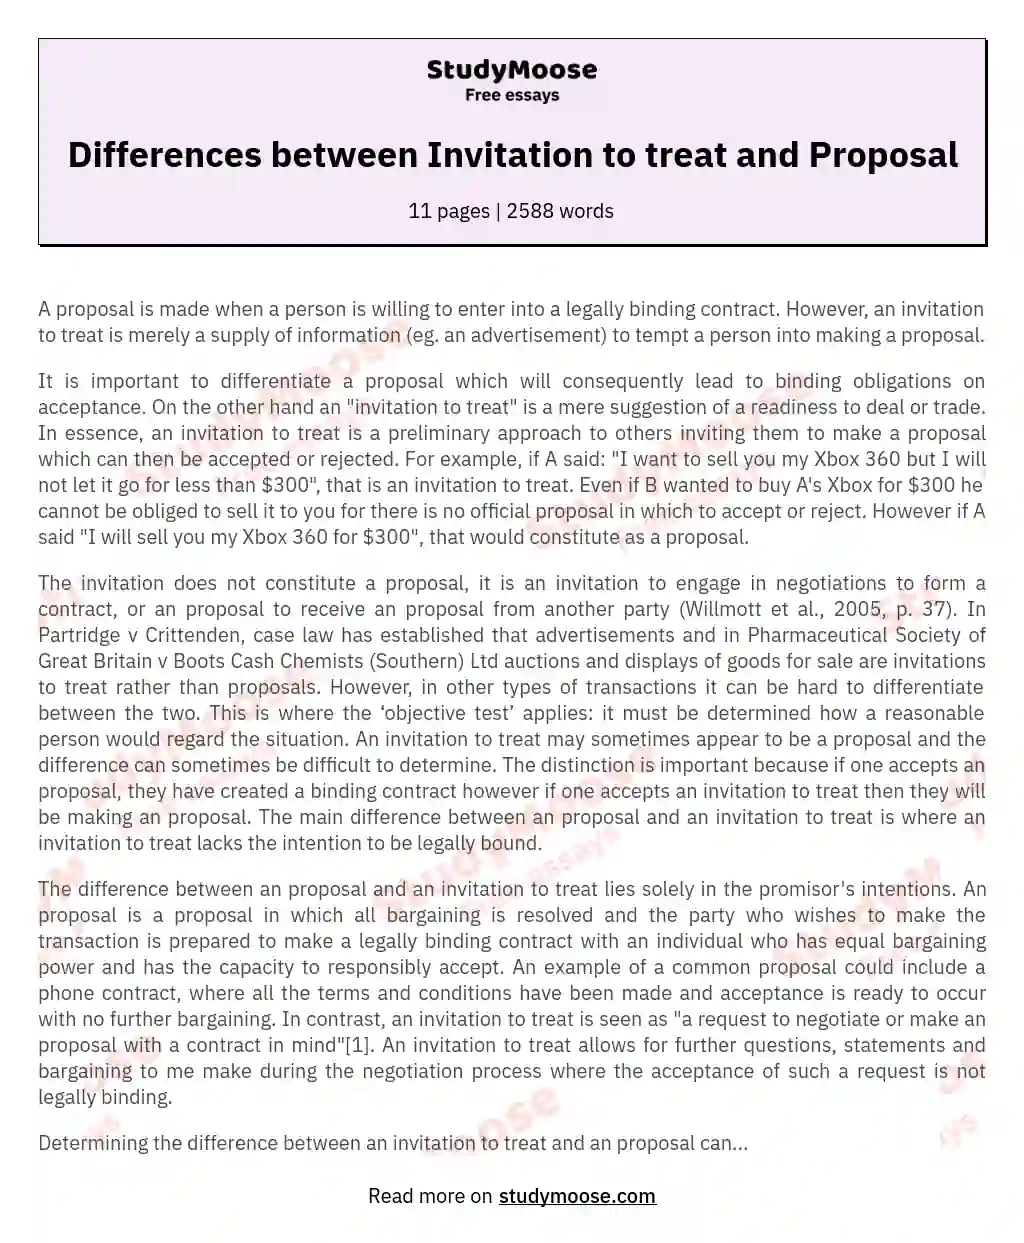 Differences between Invitation to treat and Proposal essay